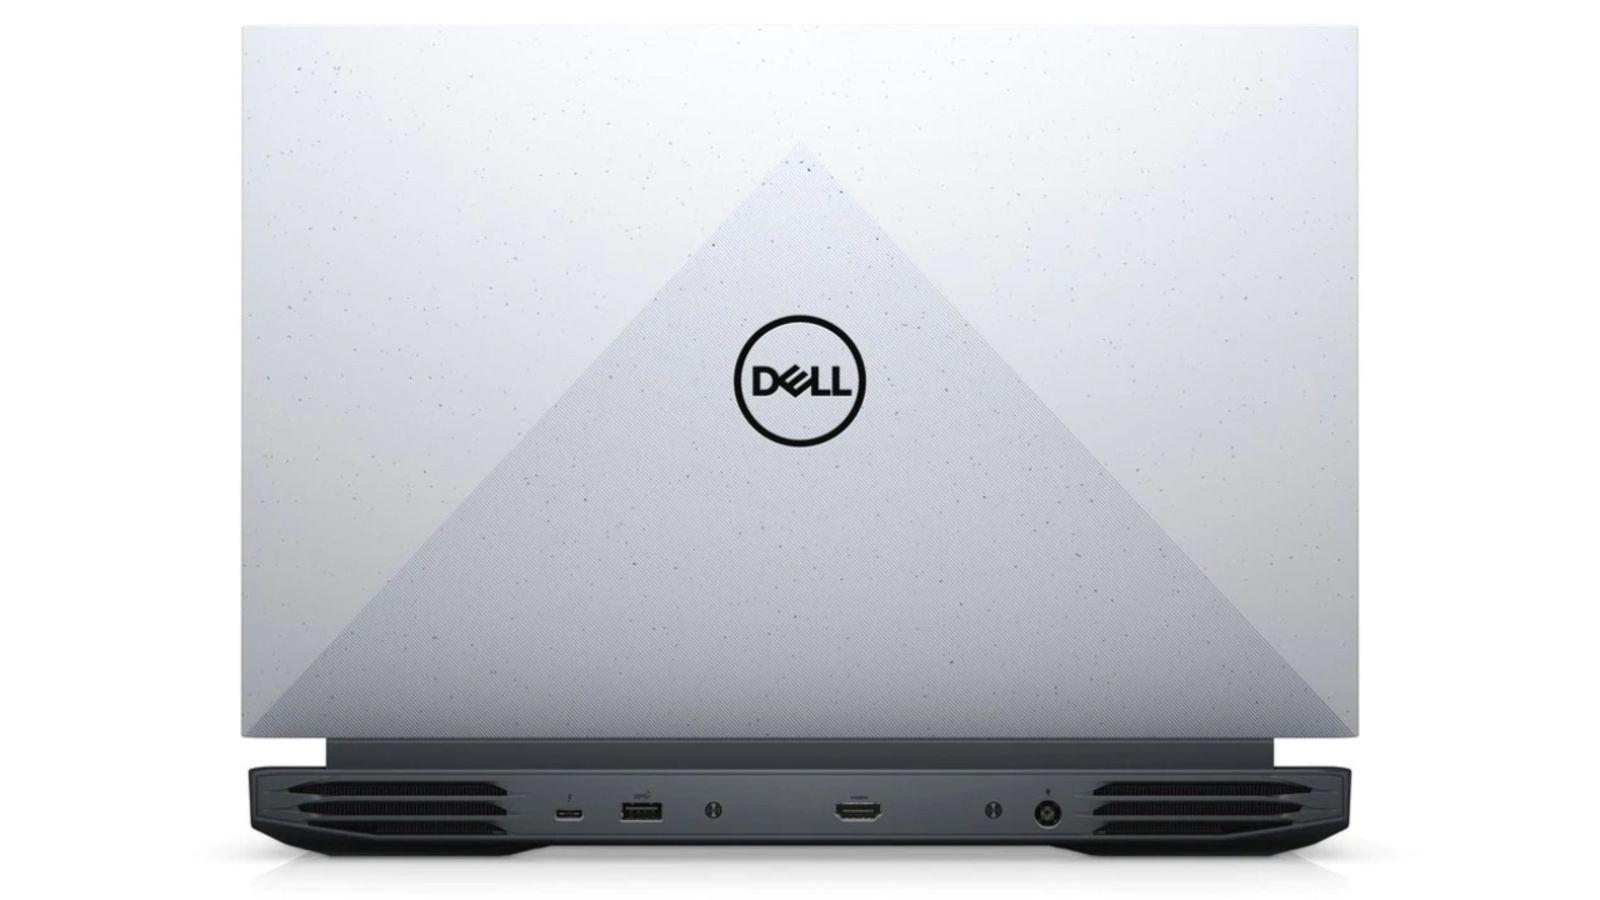 This budget gaming laptop from Dell is down to just £639